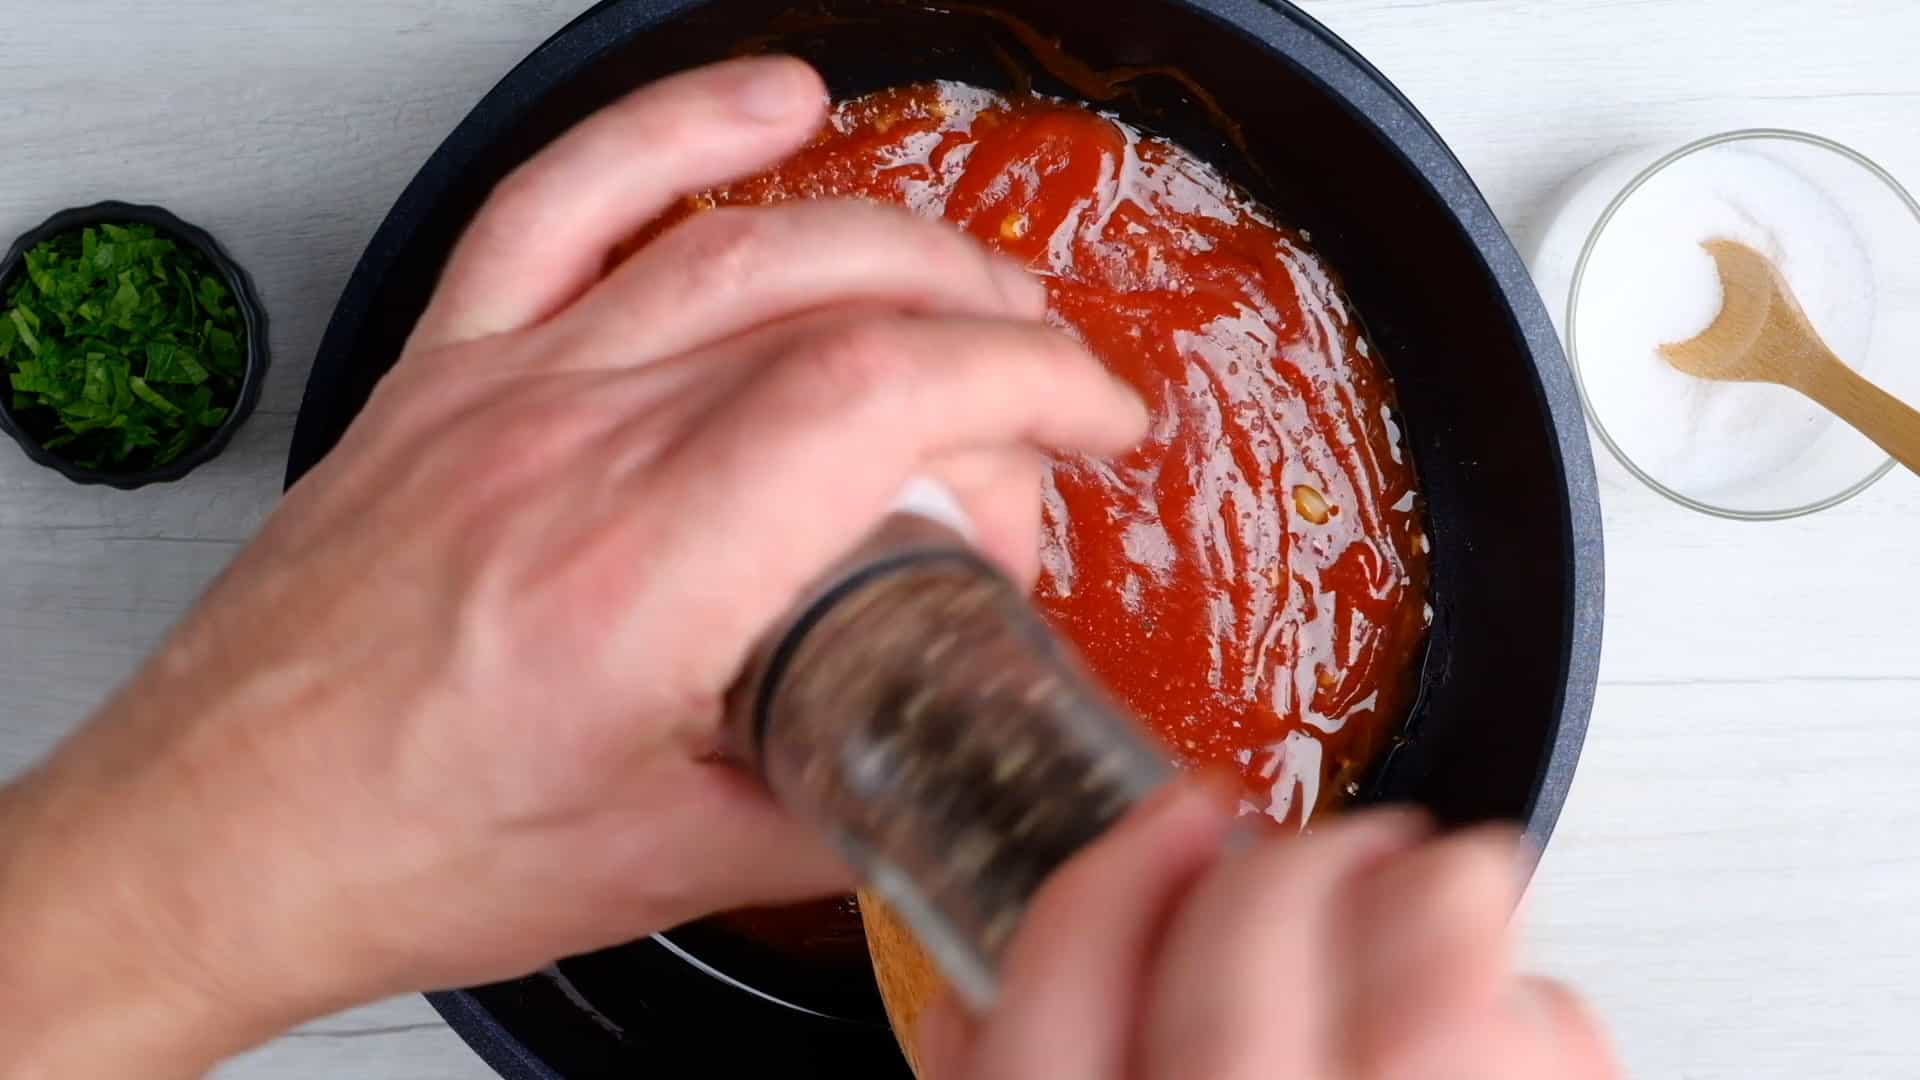 Making the sauce.